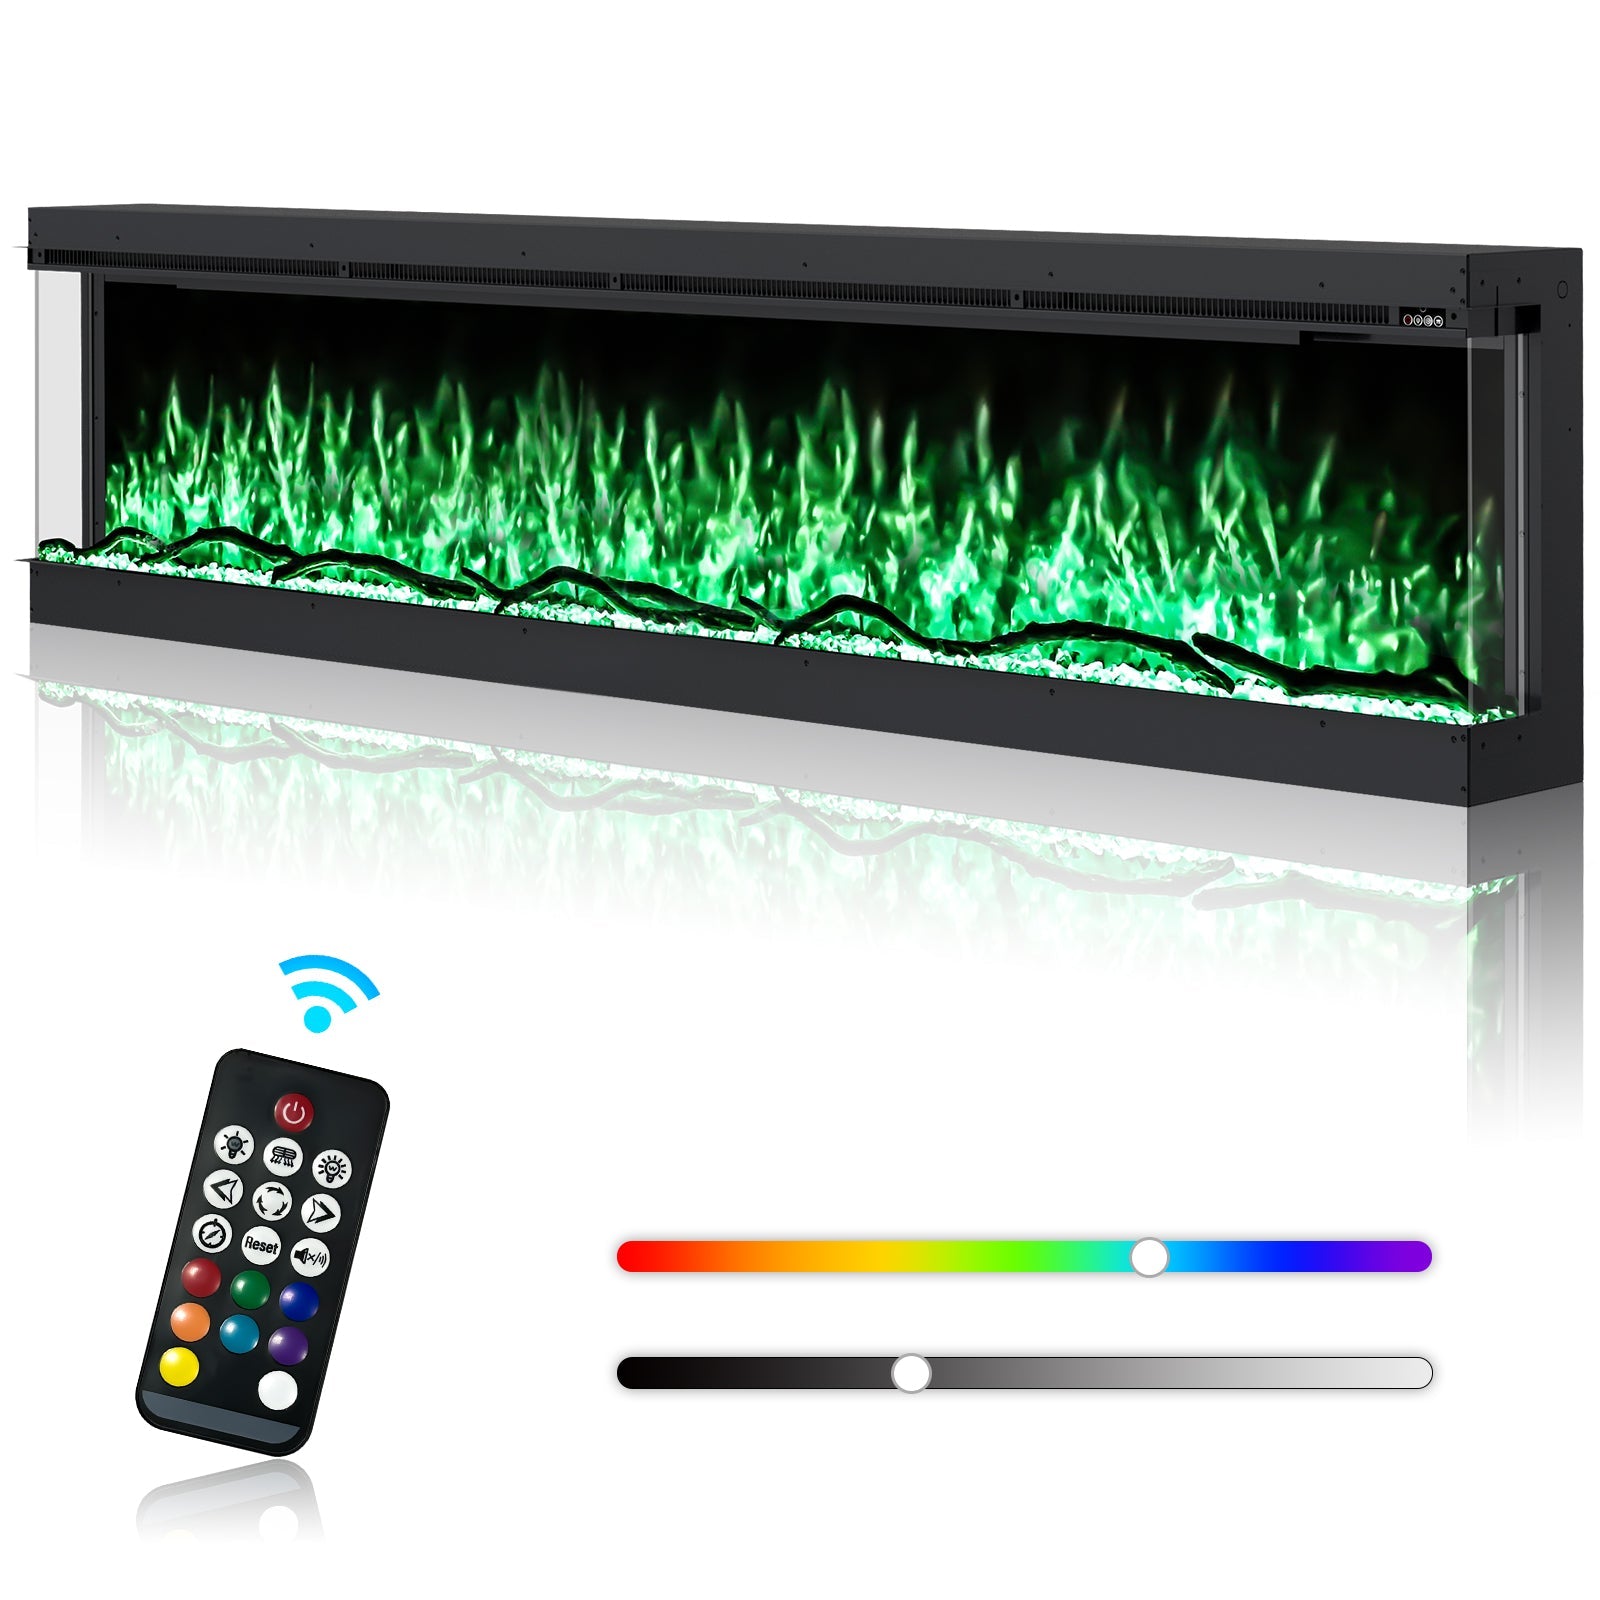 Inserts 3-Sided Electric Fireplace 60-inch Long Modern Eletric Fire Place Space Heater for Indoor Living Room Bedroom Use, Realistic Led Flame Color with Remote Control, Log & Crystals, Black